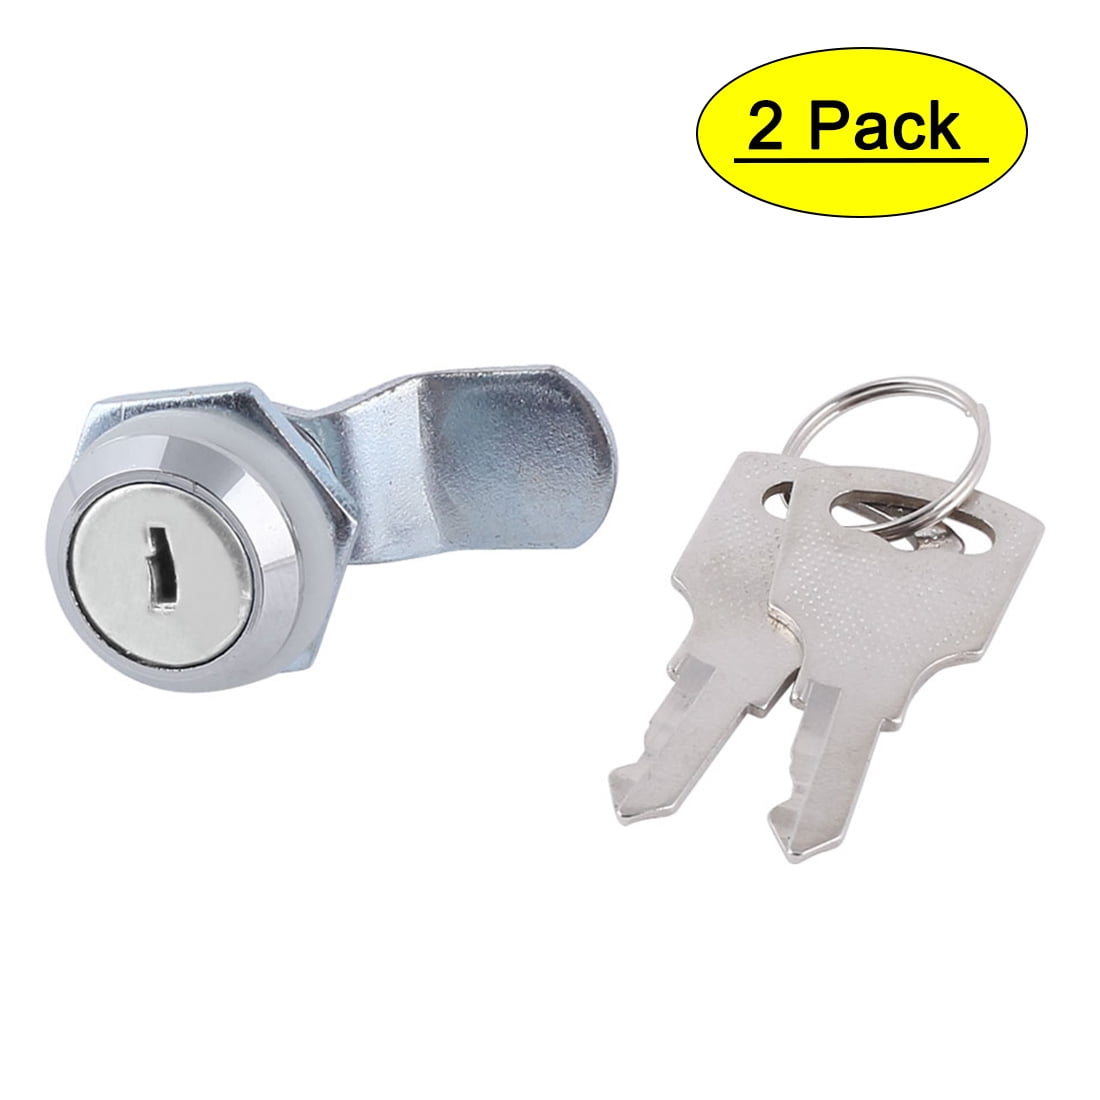 2 Sets Cabinet Drawer Locks Cam Lock Security Cupboard Mailbox Locking Zinc Alloy Filling Cabinet Door Locker Letter Box Lock Office Home Hardware for Small Furniture File Safety Accessory with Keys 